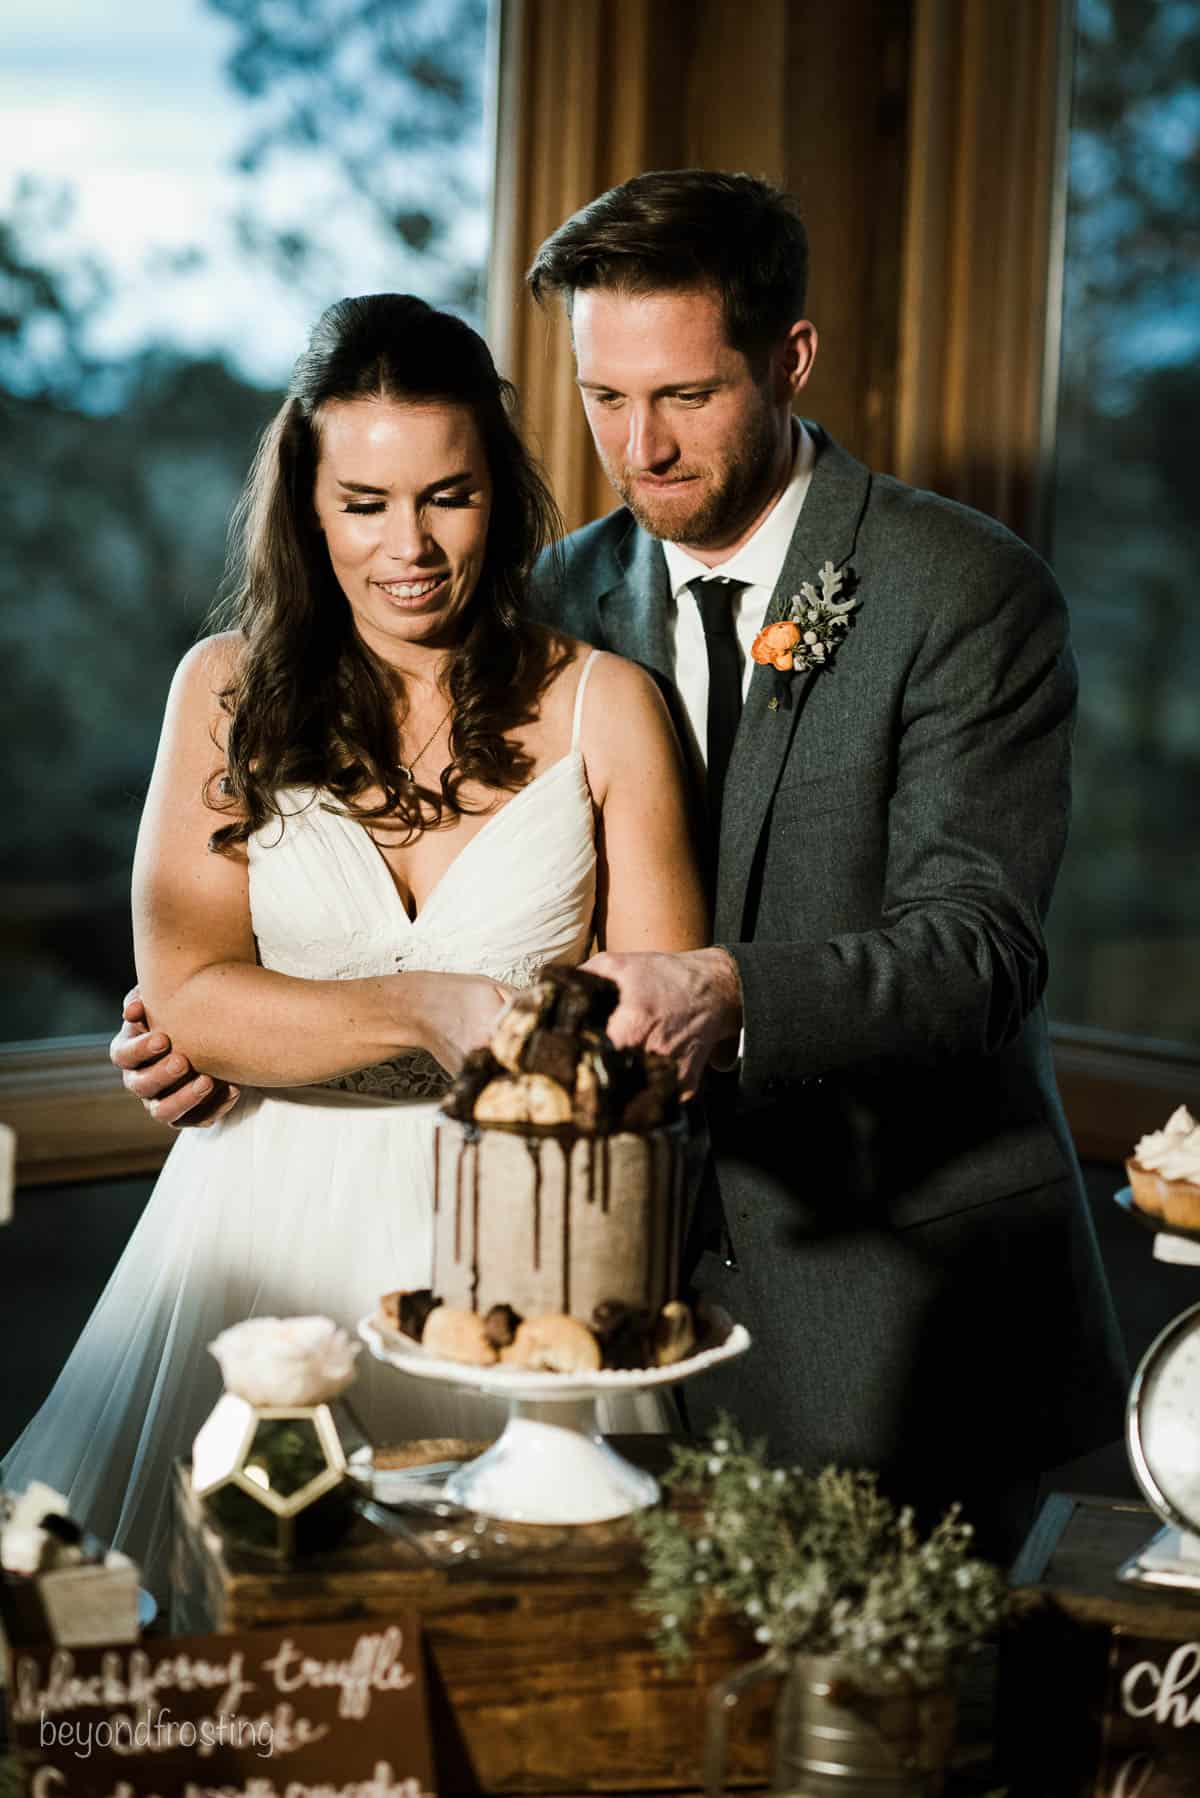 Julianne Dell of Beyond Frosting and Husband cutting a wedding cake